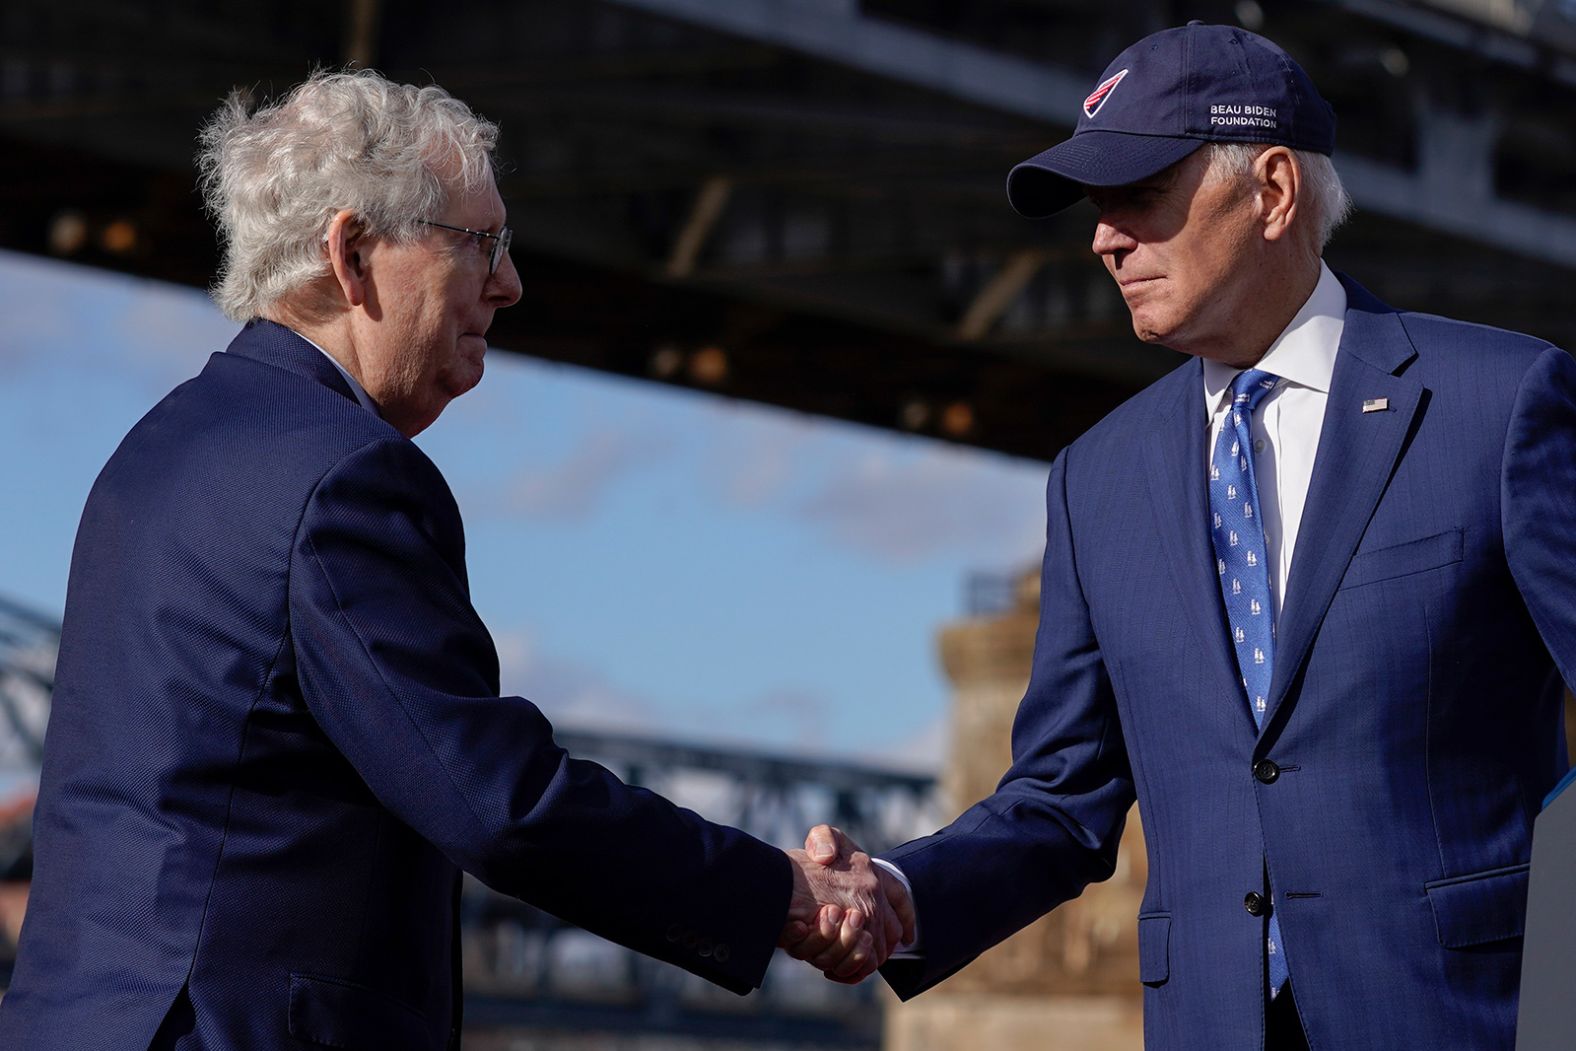 US President Joe Biden, right, shakes hands with Senate Minority Leader Mitch McConnell after speaking under the Clay Wade Bailey Bridge in Covington, Kentucky, on Wednesday, January 4. The two men <a href="index.php?page=&url=https%3A%2F%2Fwww.cnn.com%2F2023%2F01%2F04%2Fpolitics%2Fbiden-kentucky-infrastructure-wednesday%2Findex.html" target="_blank">promoted a major bipartisan legislative accomplishment</a> they achieved together: the implementation of a massive $1.2 trillion infrastructure bill.